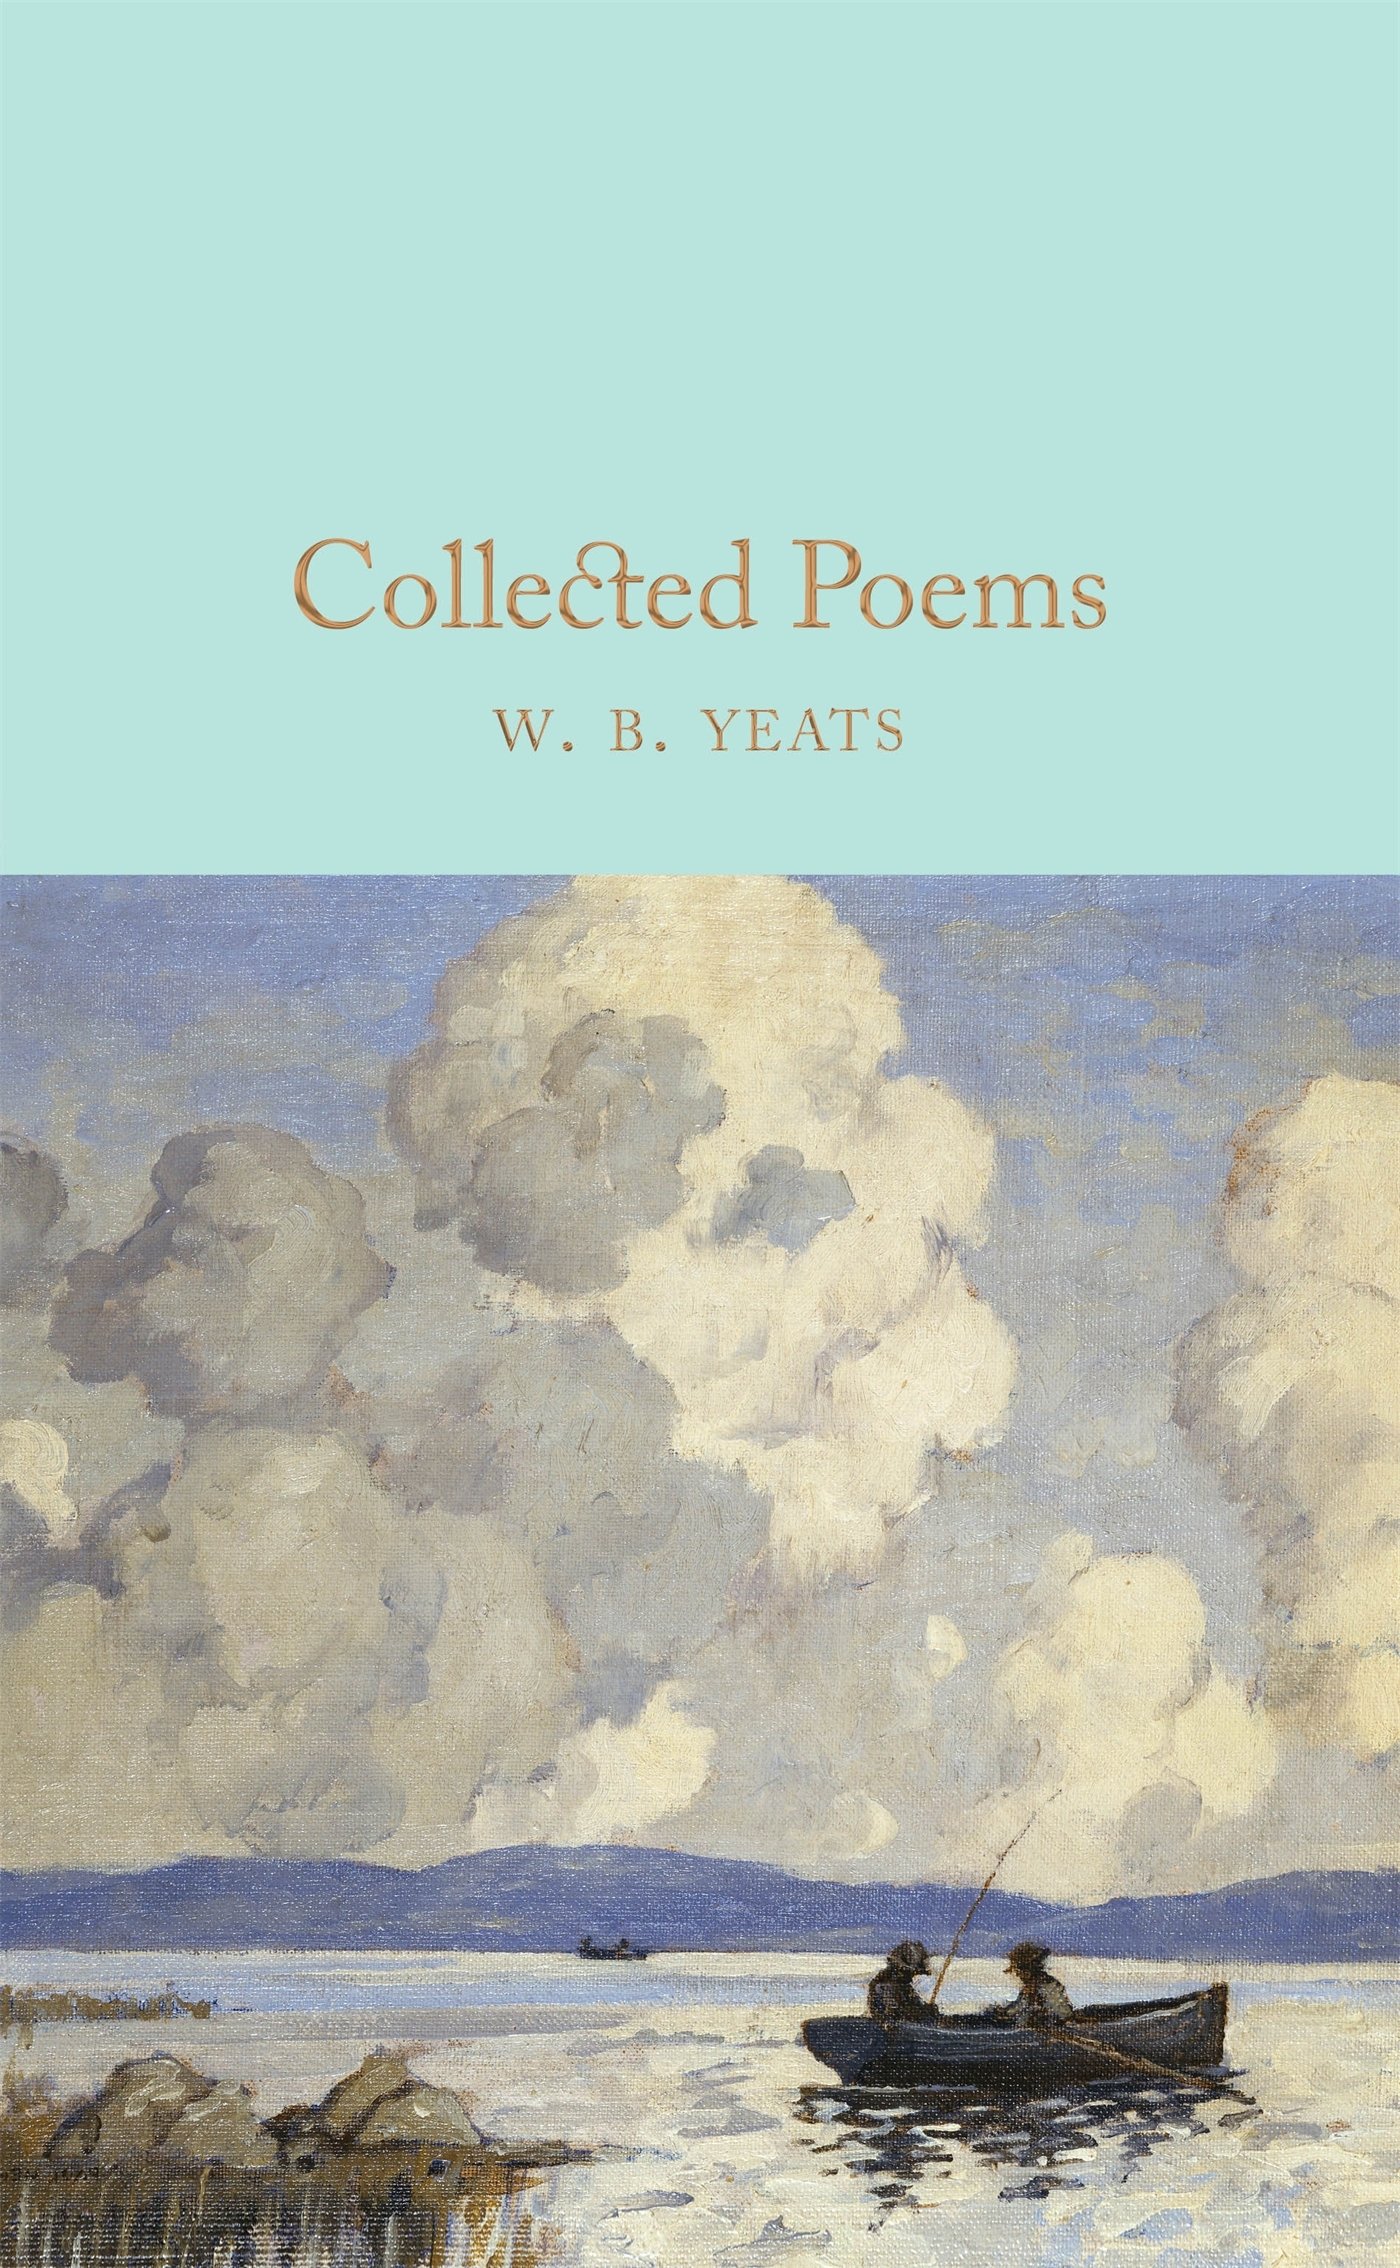 The Collected Poems of W.B. Yeats (W. B. Yeats)